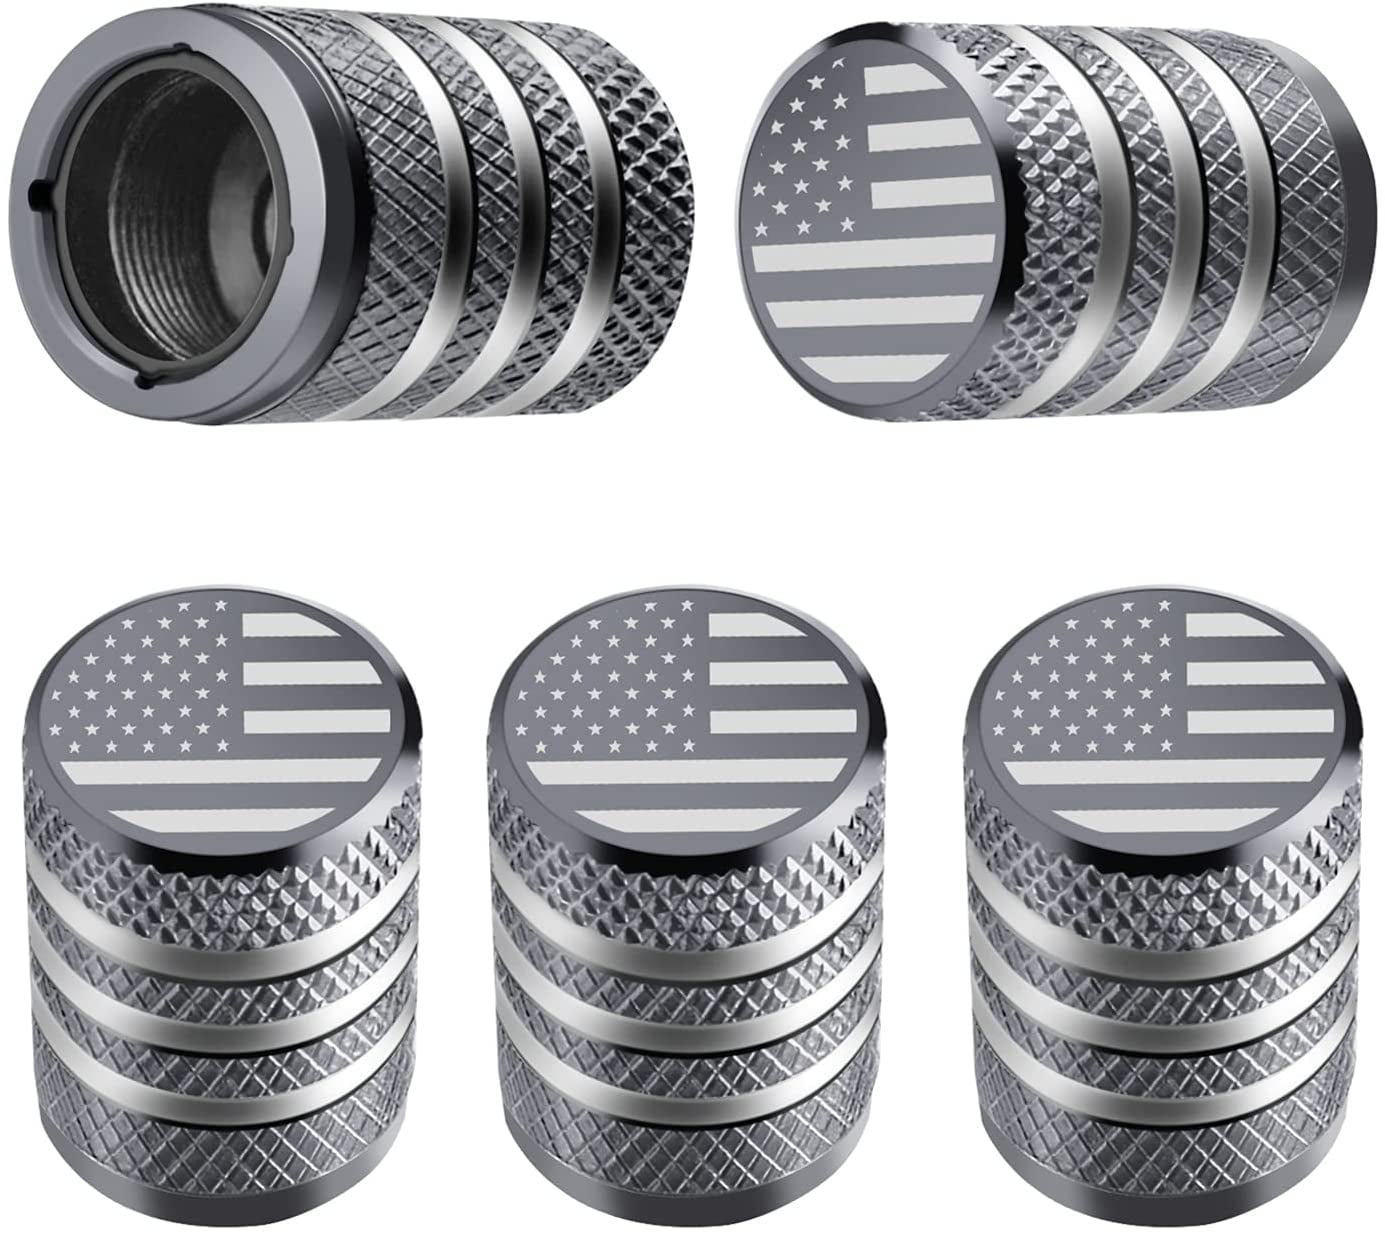 Tire Air Cap Metal with Plastic Liner Corrosion Resistant Leak-Proof American Flag for Car Truck Motorcycle Bike Tire Valve Stem Cap Cover 12 Pack 